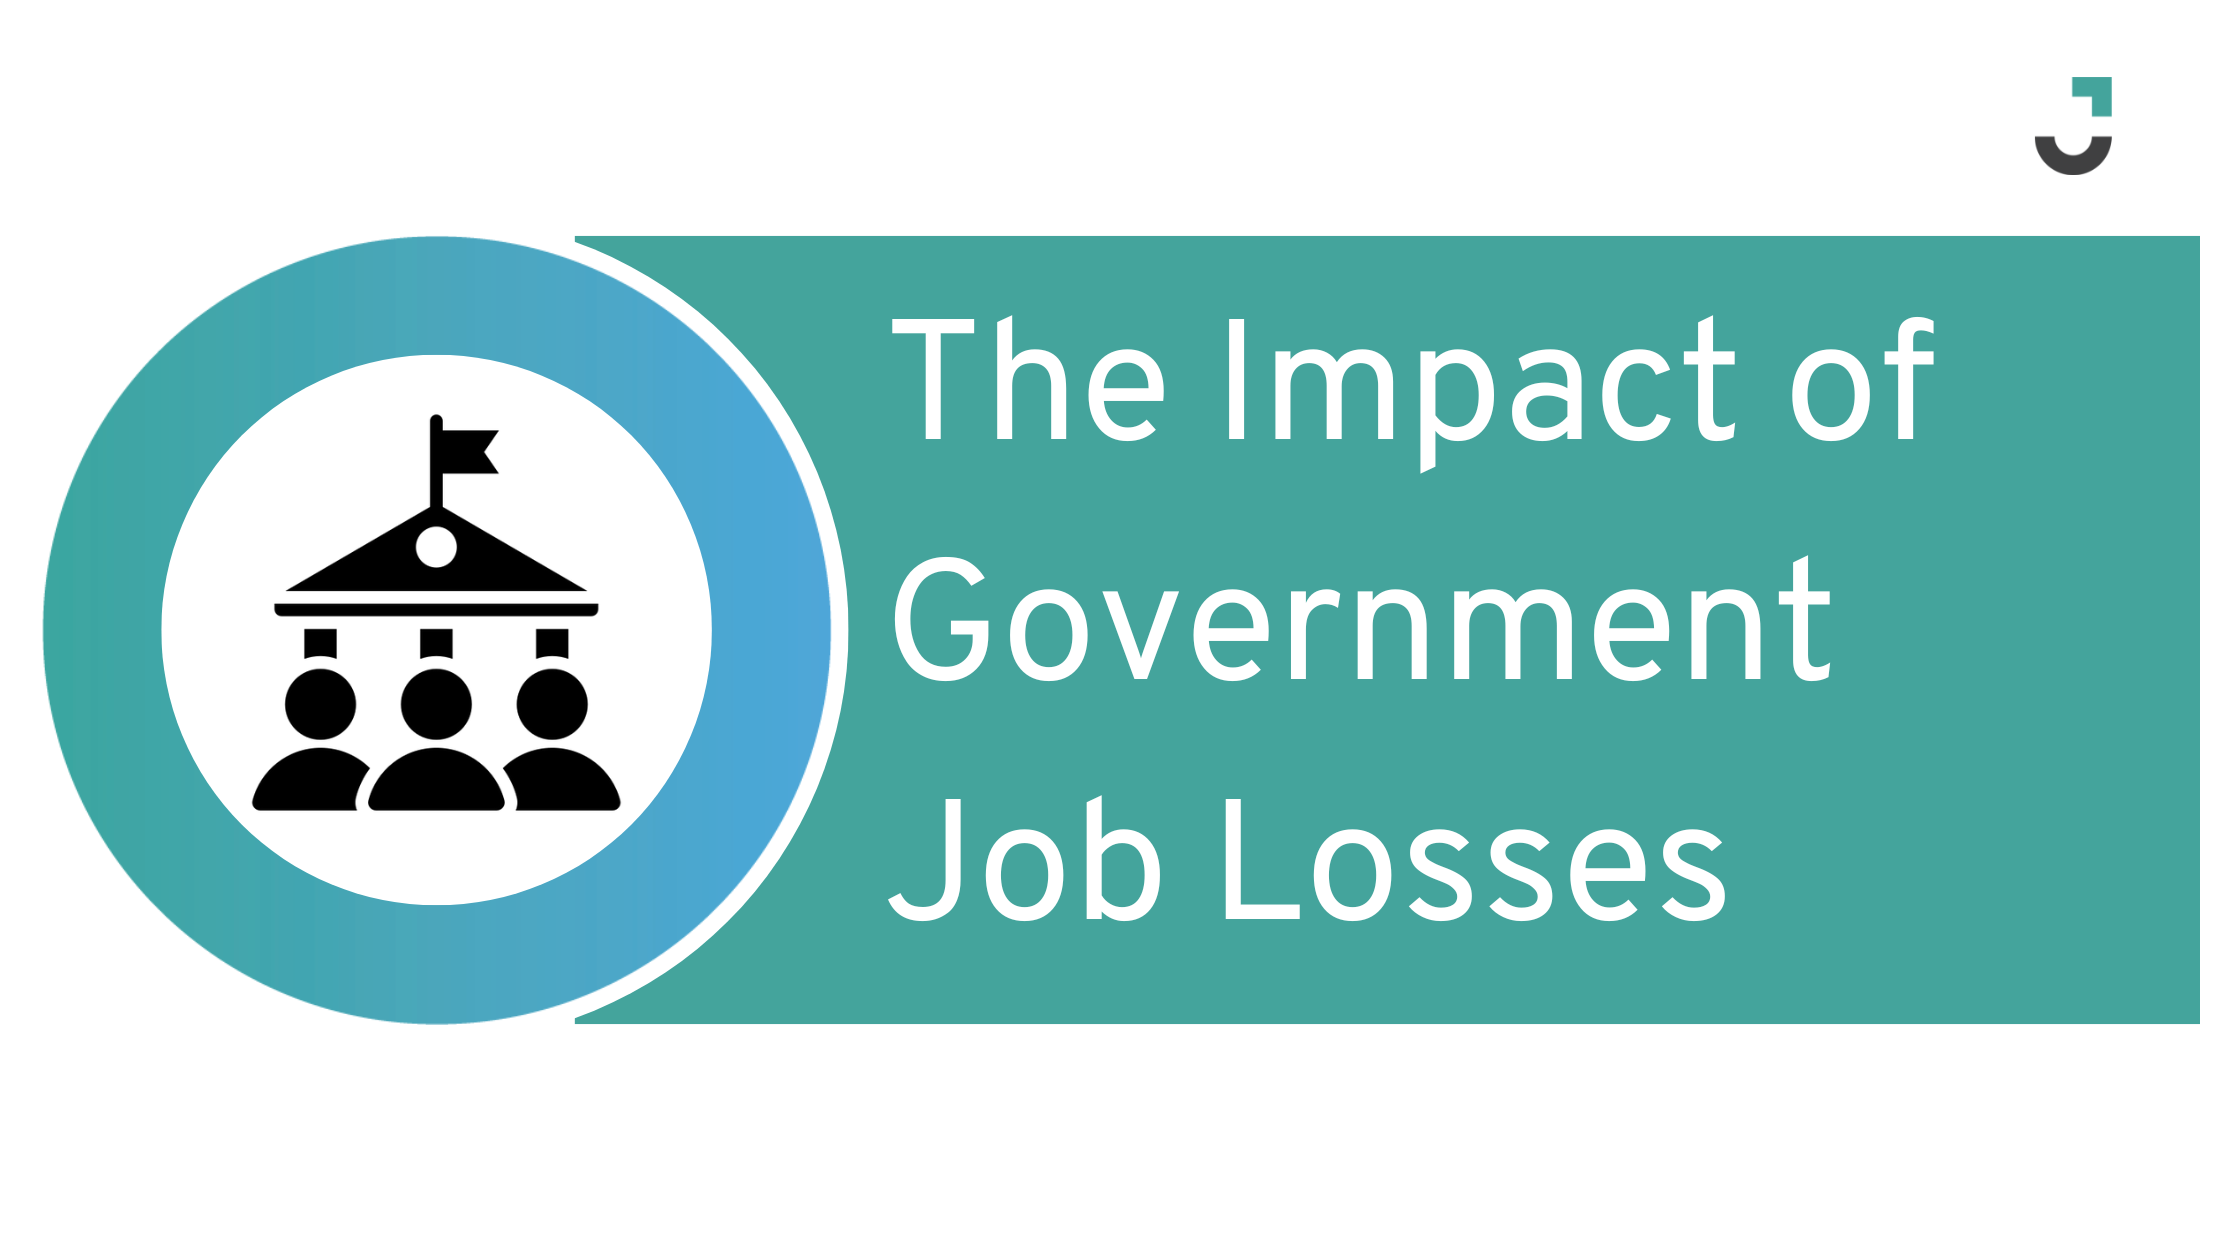 The Impact of Government Job Losses